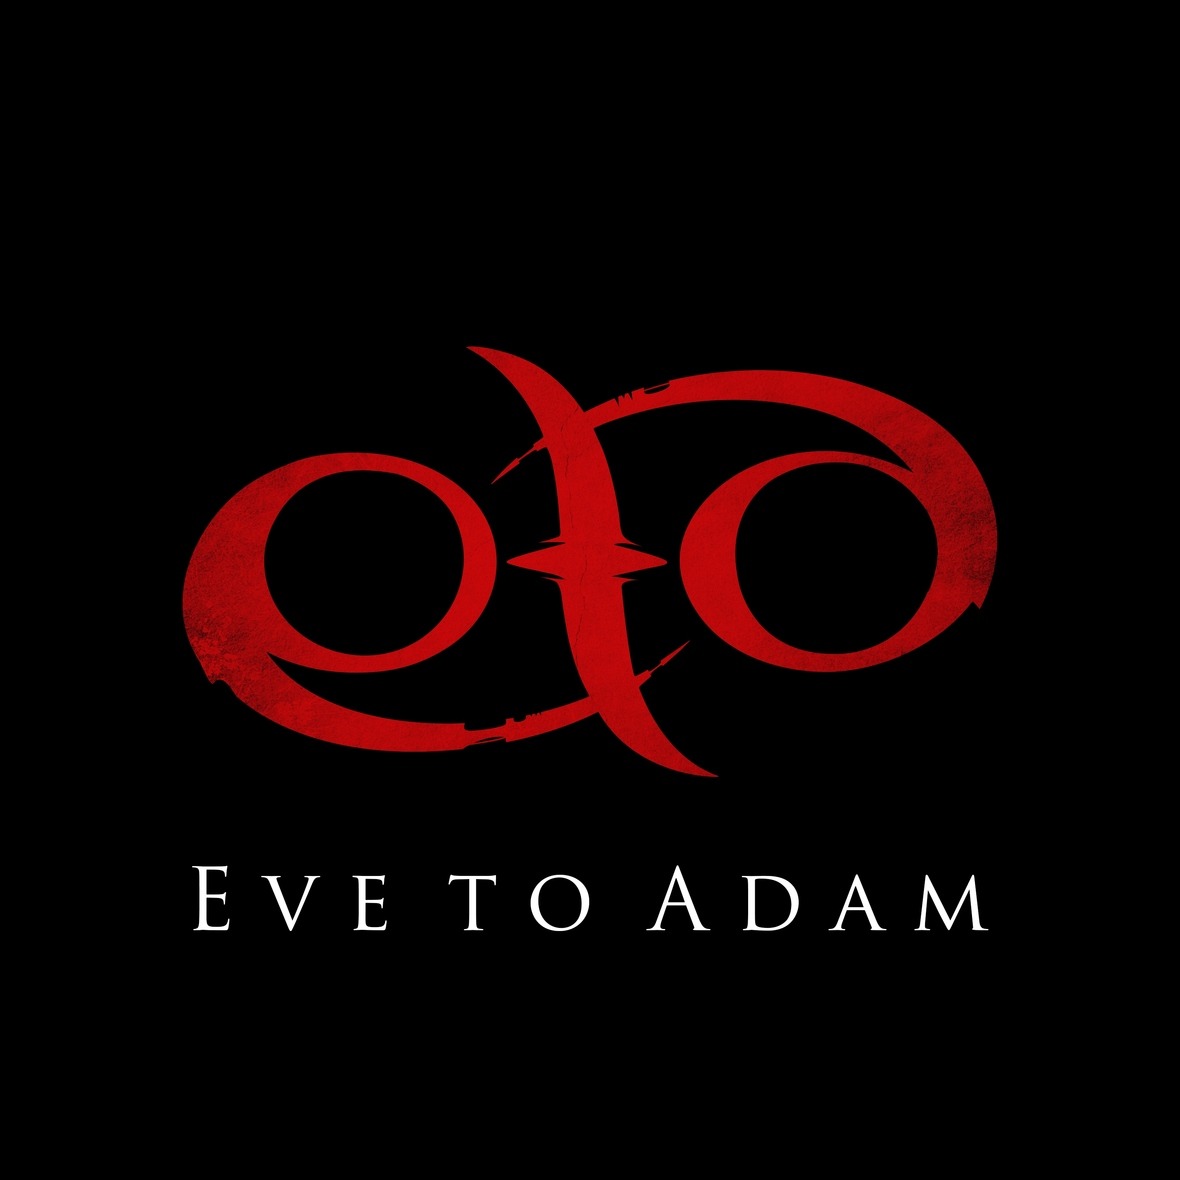 Eve To Adam Release "Tongue Tied" Off of Upcoming 'Odyssey'